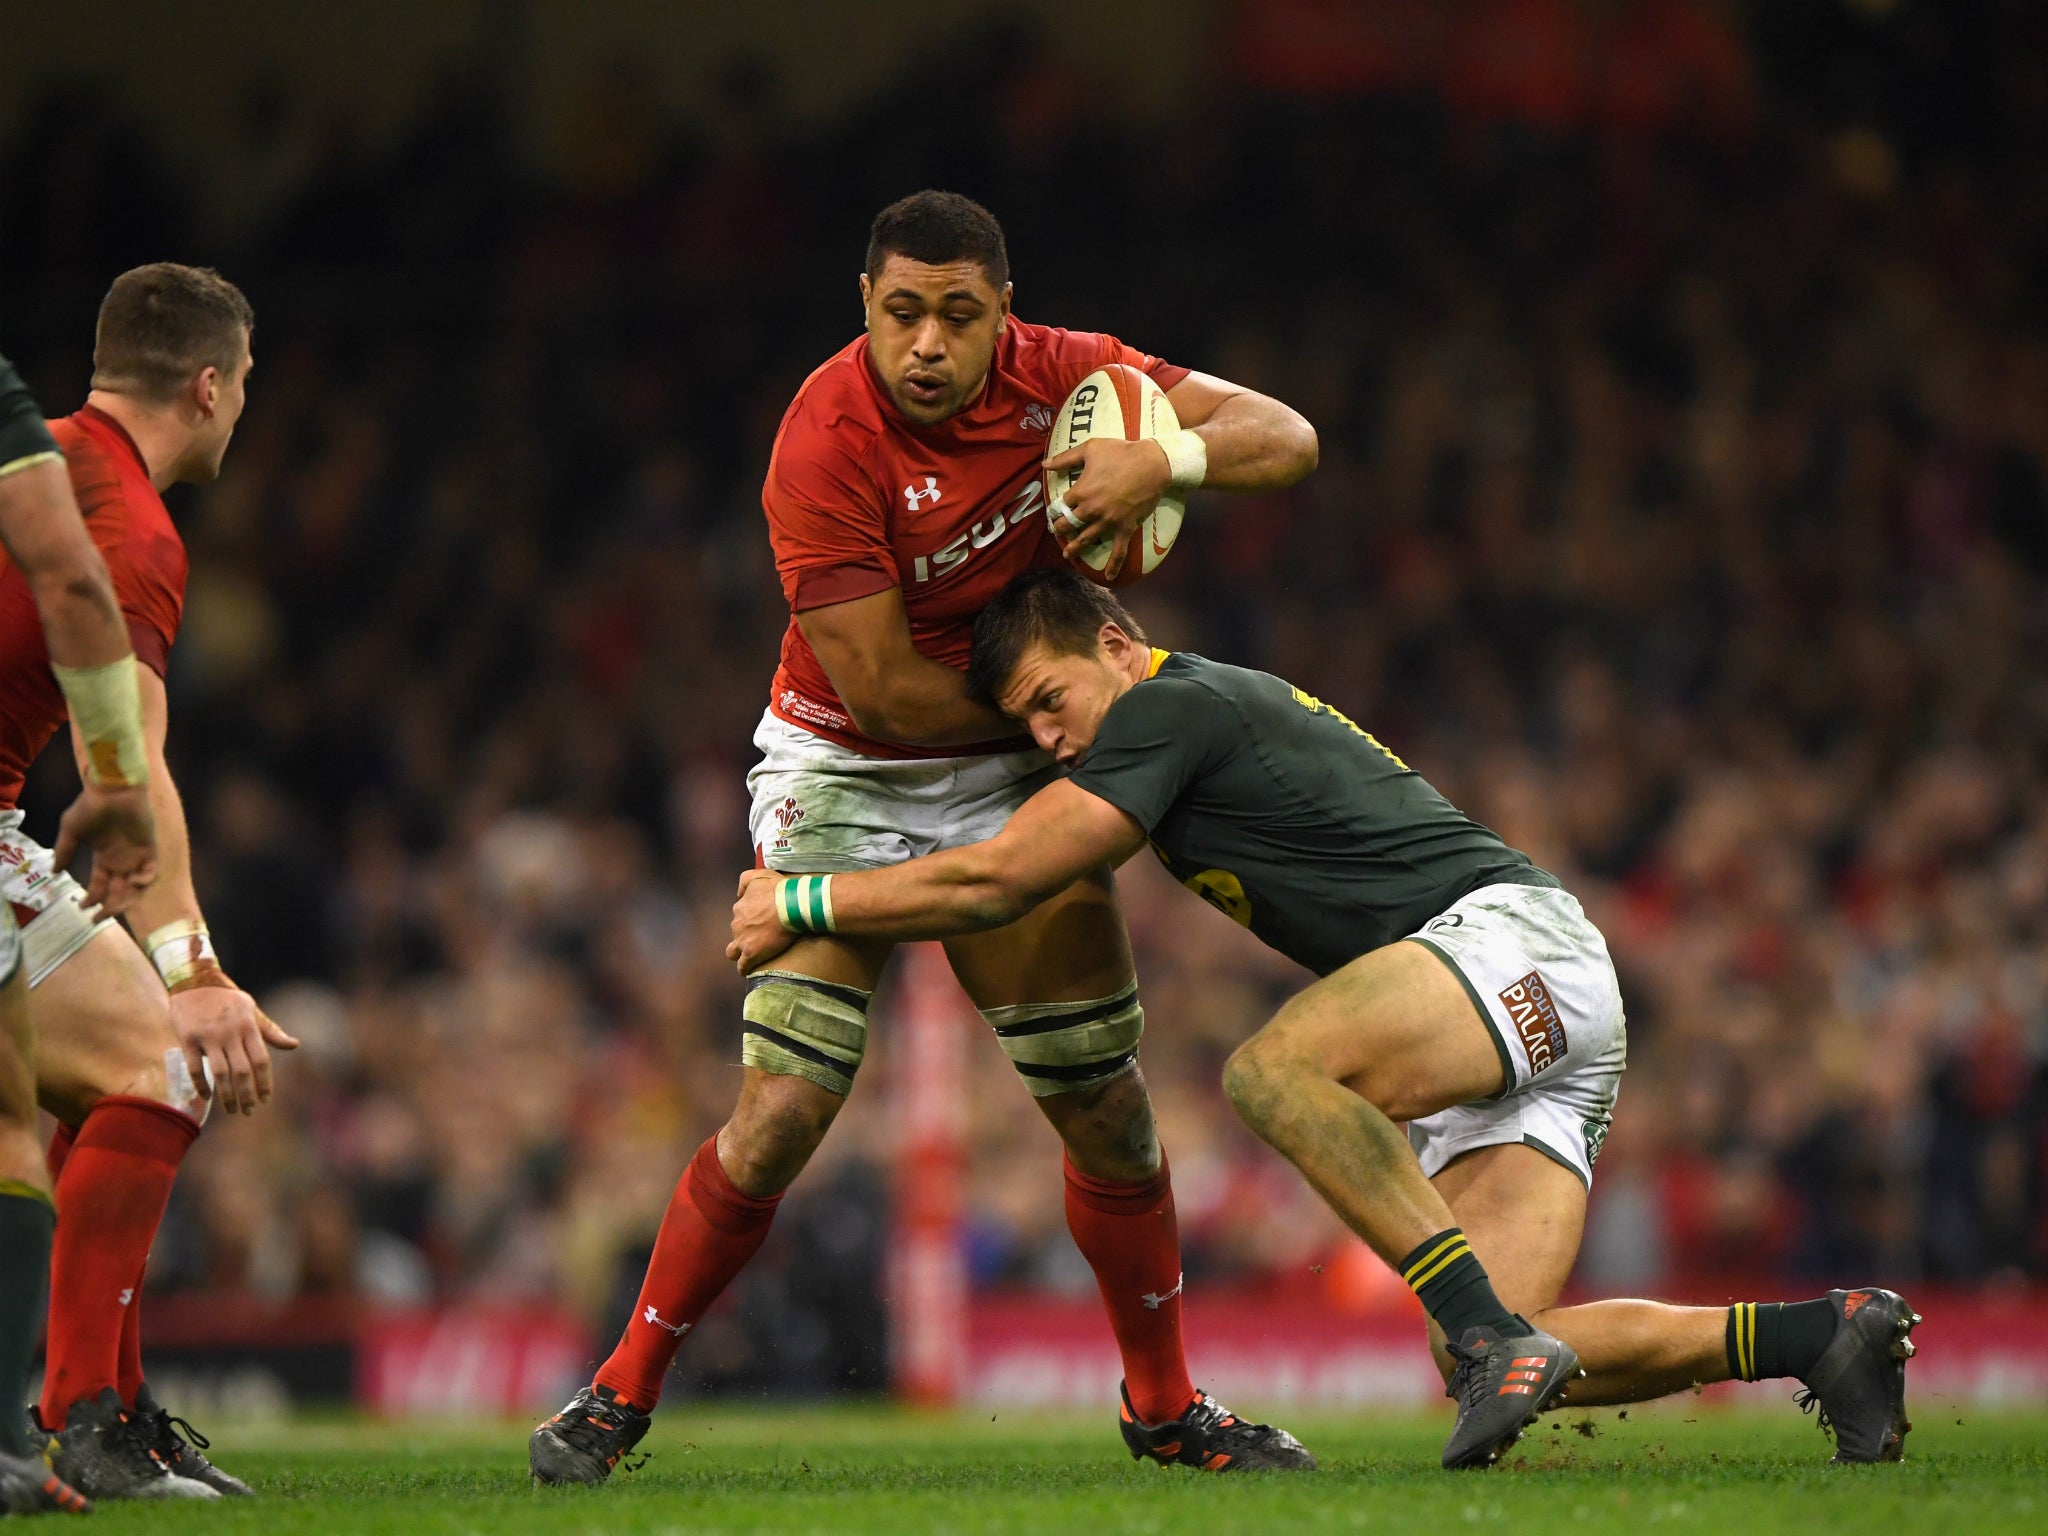 &#13;
Taulupe Faletau has not played for Wales since the South Africa game &#13;